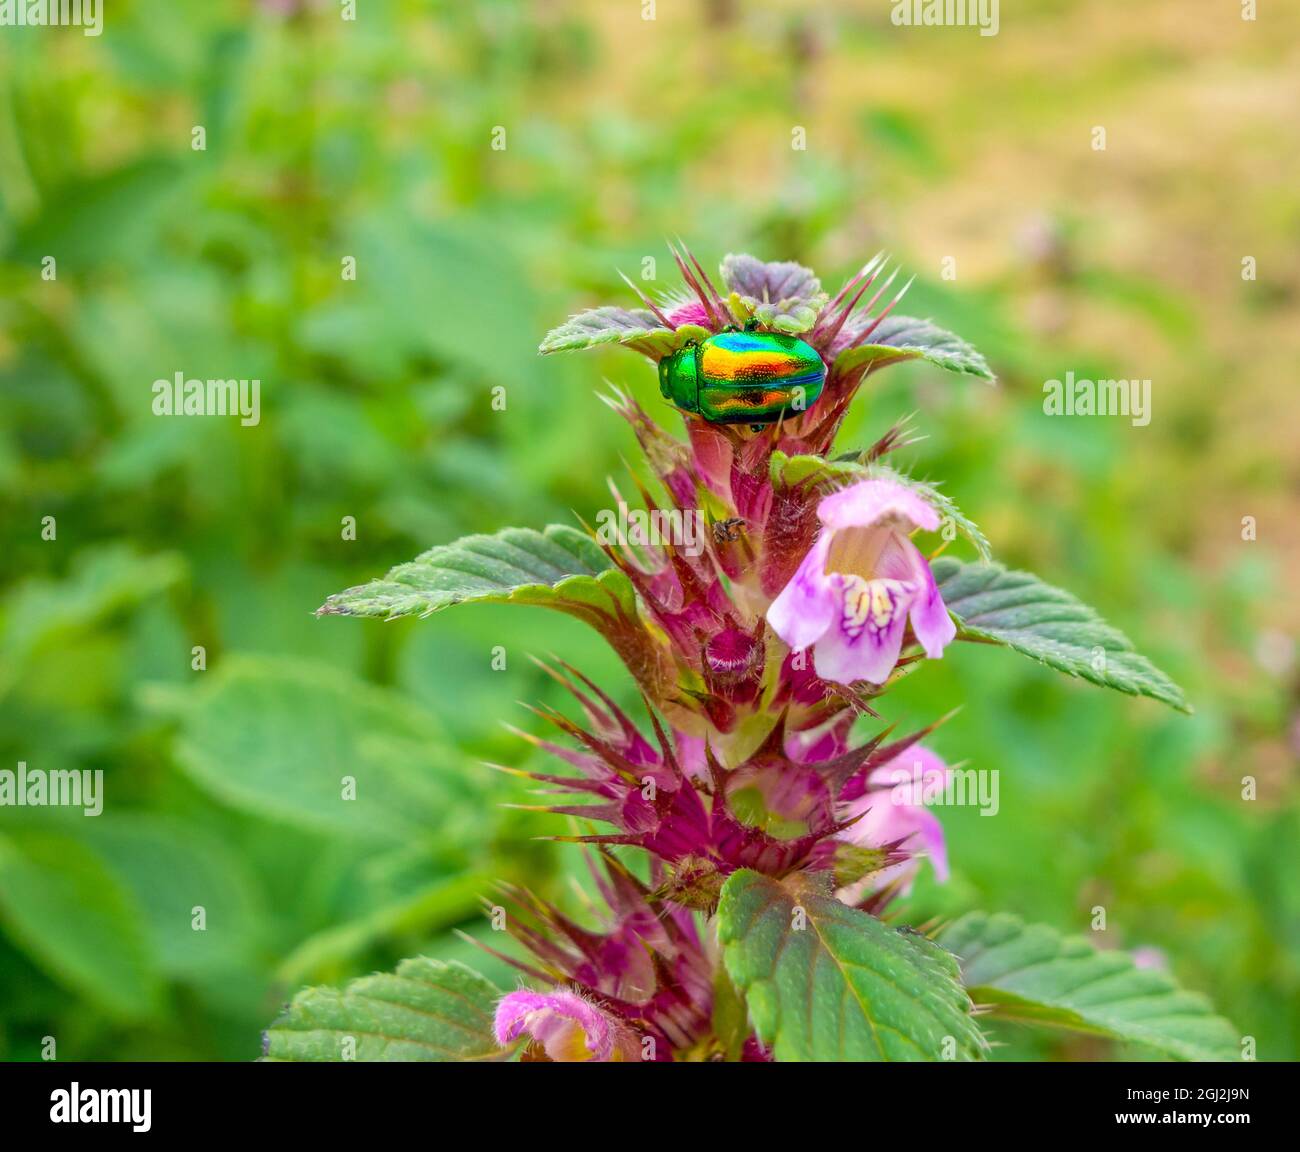 colorful metallic iridescent dead-nettle leaf beetle on a flower tip in natural green ambiance Stock Photo